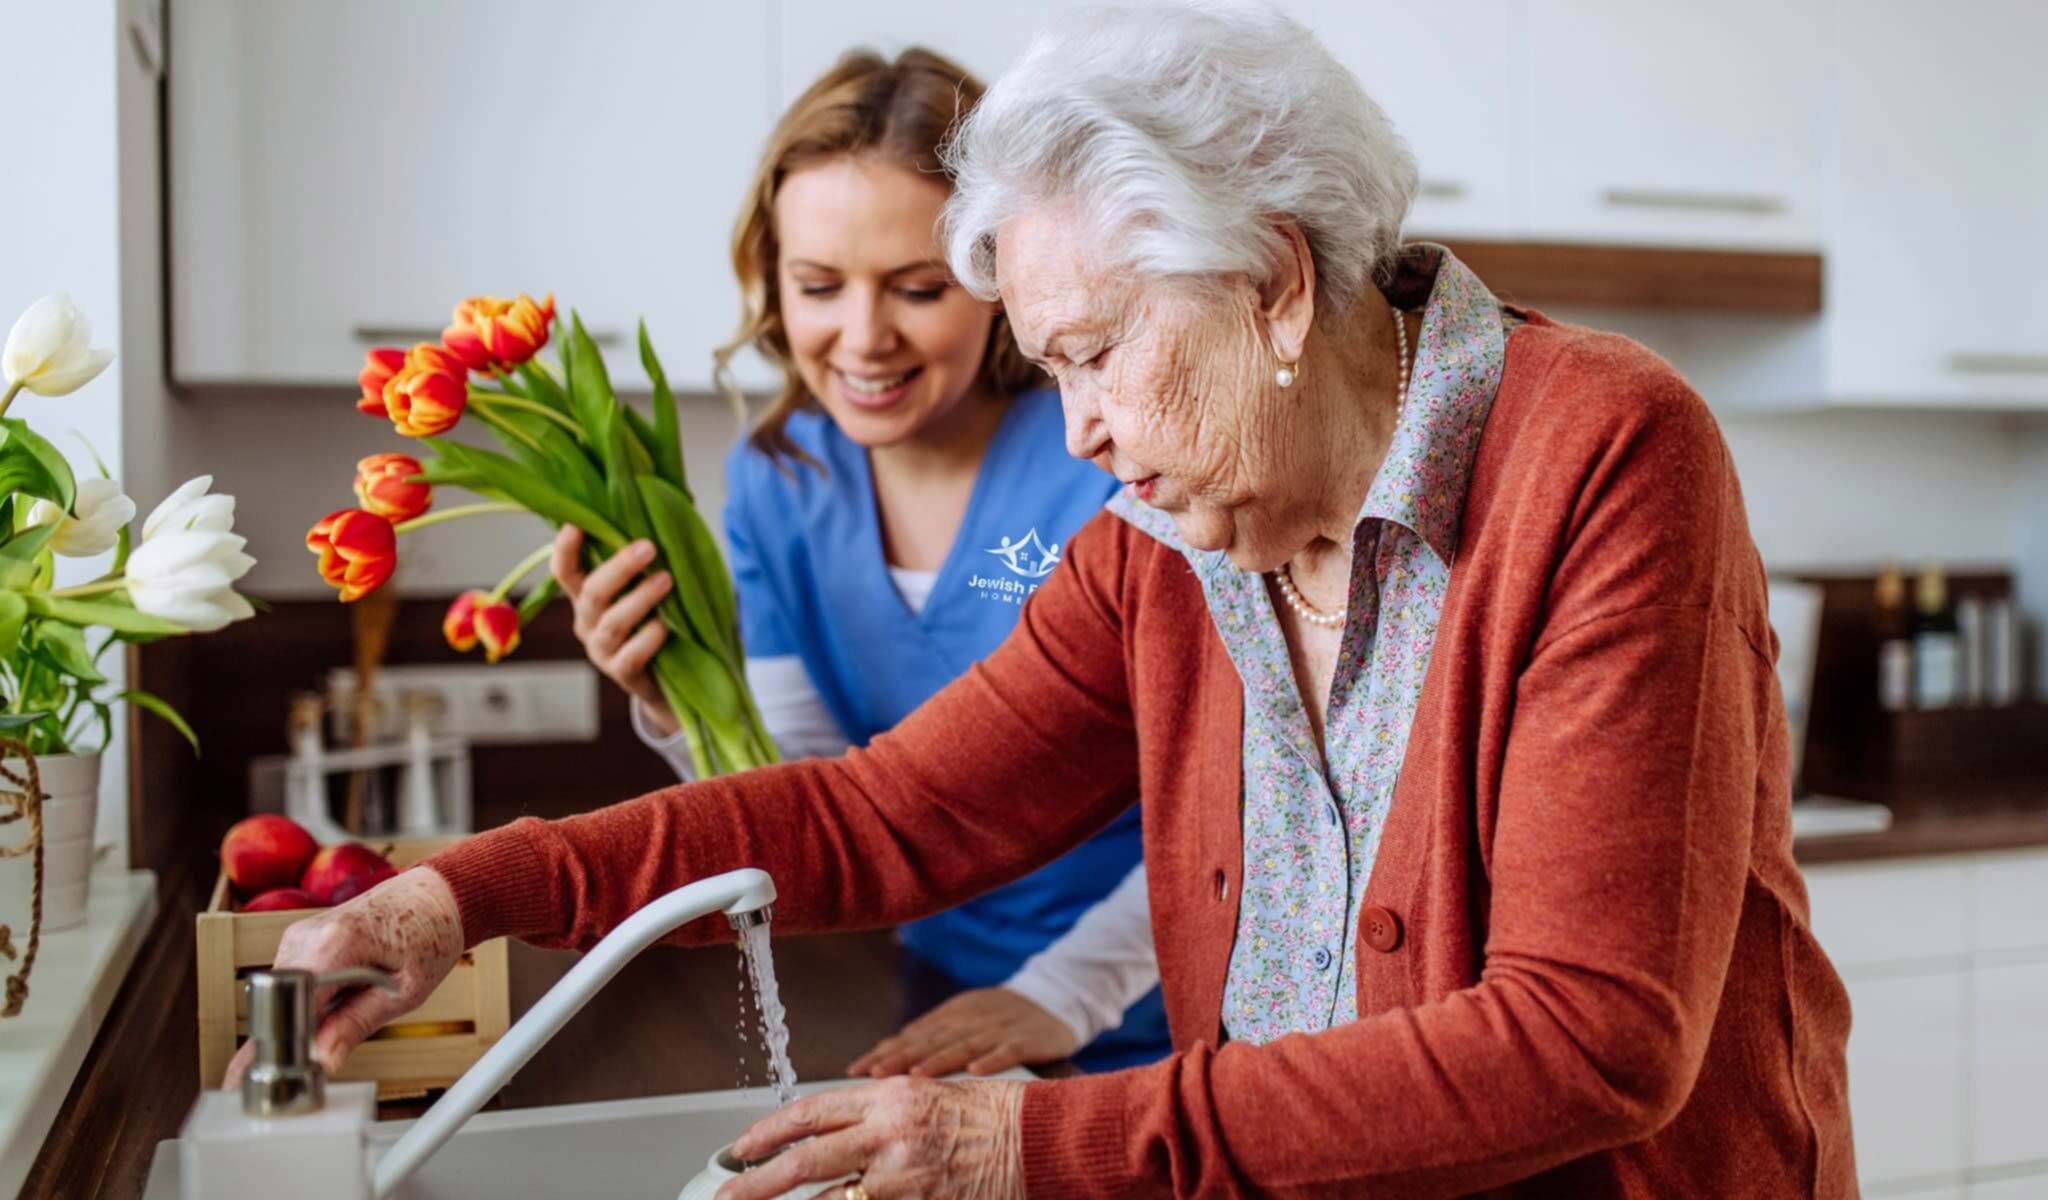 Senior client and caregiver putting flowers in a vase